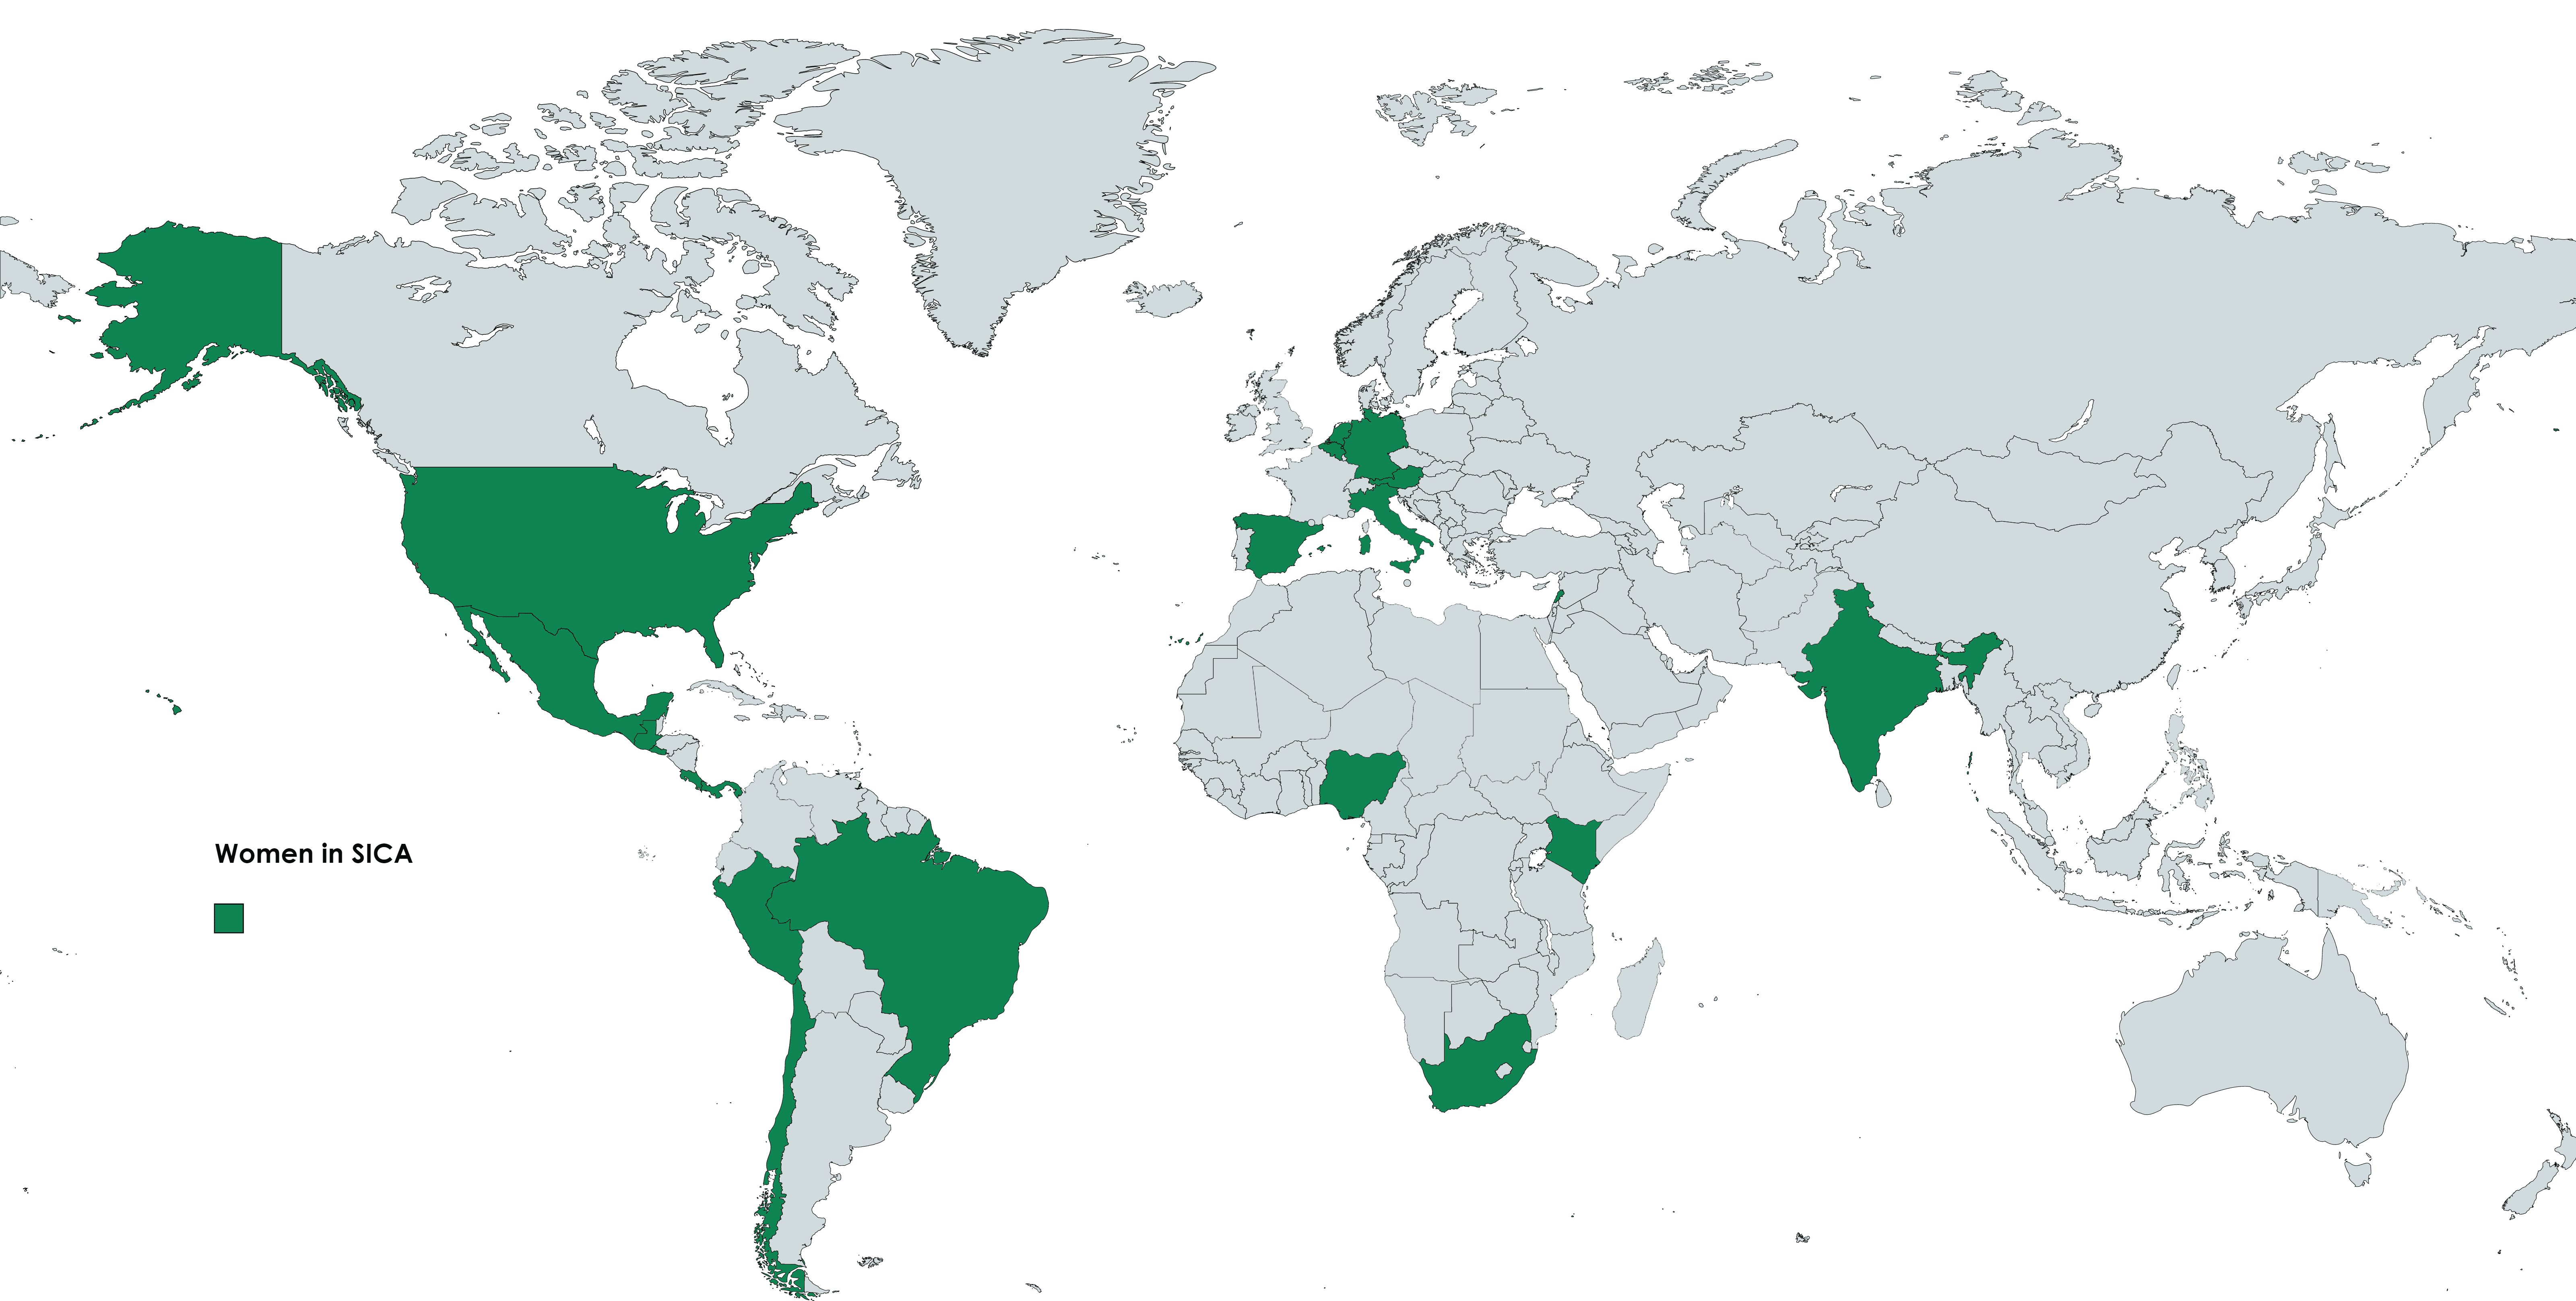 Map of the world with mentor countries highlighted